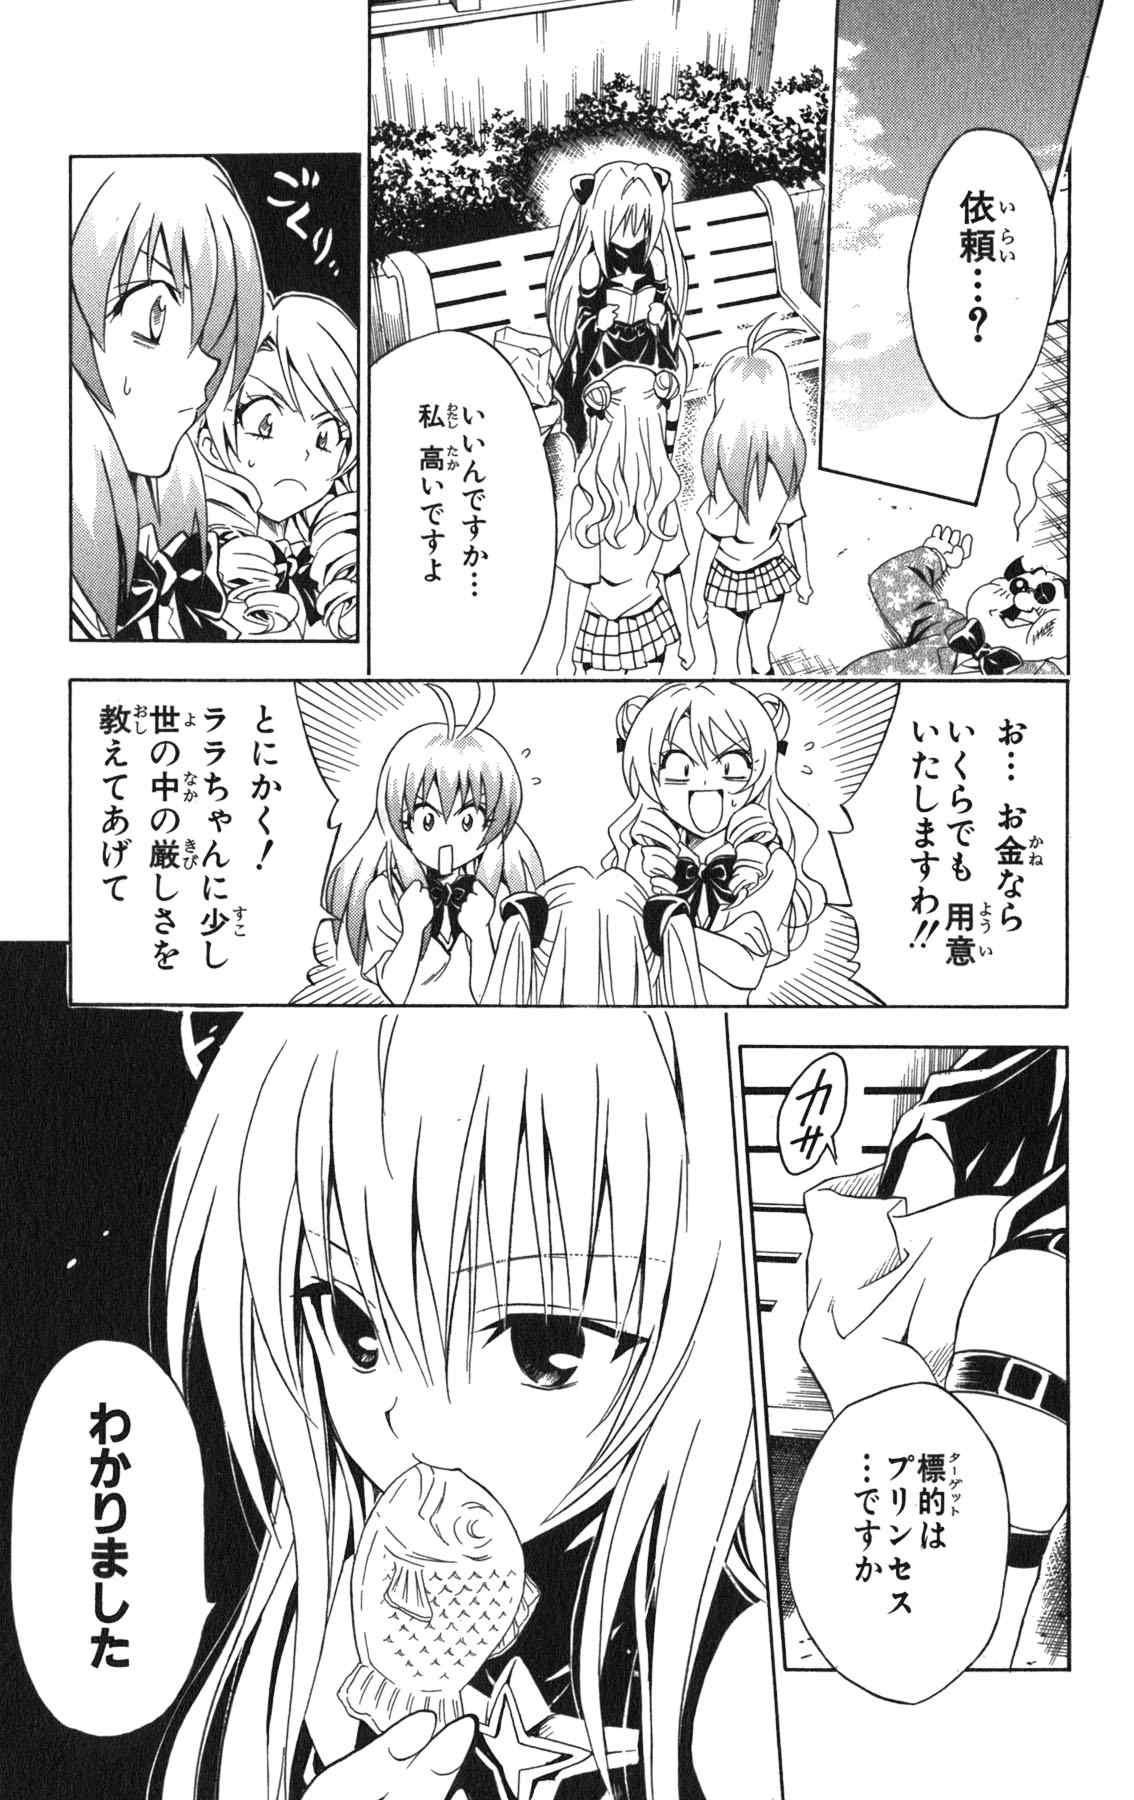 《To LOVEるとらぶる》漫画 To LOVE 09卷